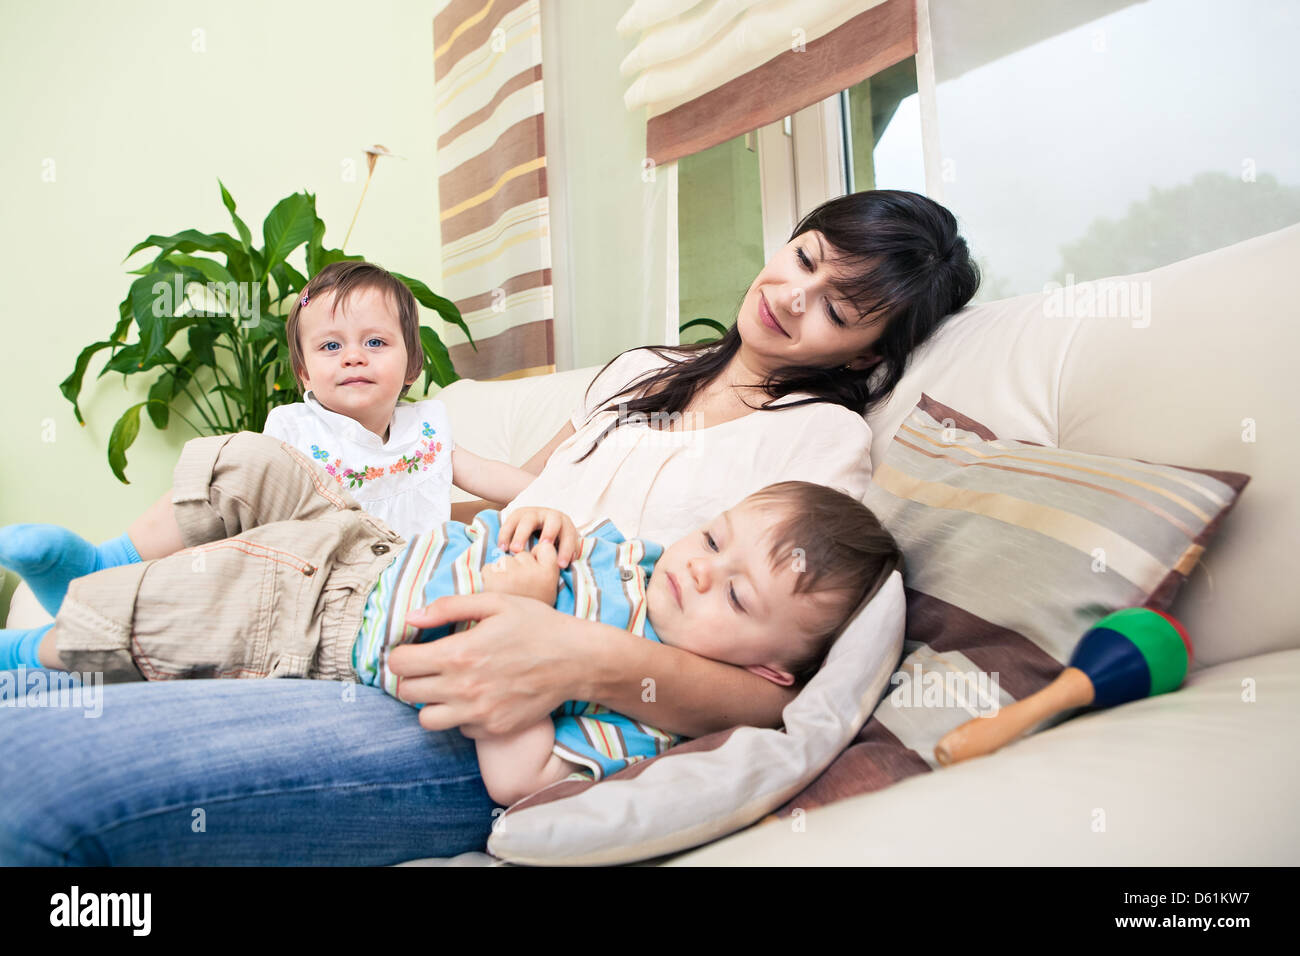 indoor portrait of a young woman with toddler twins in the living room Stock Photo